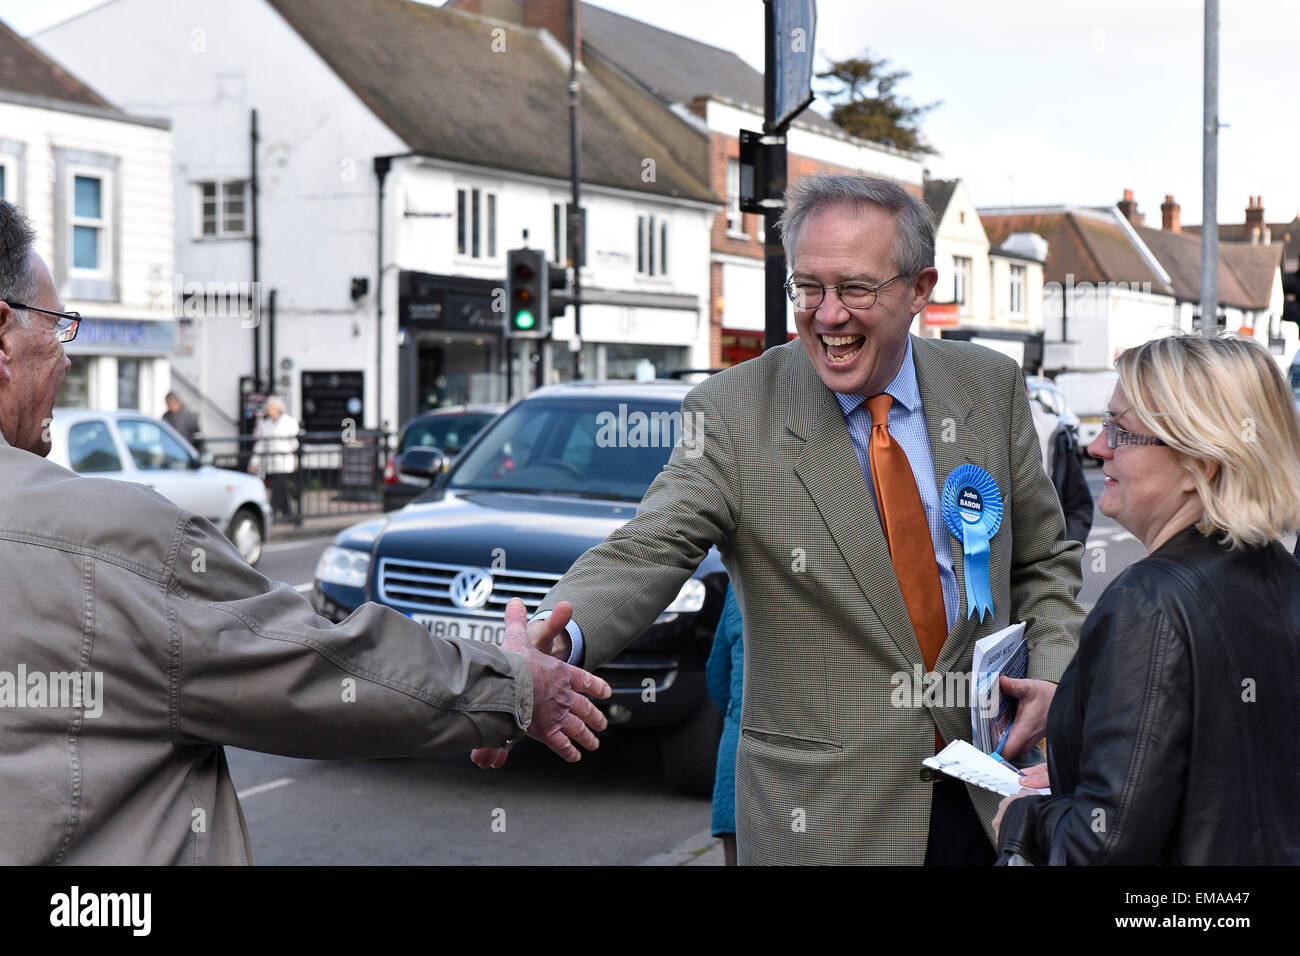 Billericay, UK. 18th April, 2015. In the run-up to the General Election, John Baron, prospective MP for Basildon and Billericay meets and greets his constituents in Billericay High Street in Essex. Credit:  Gordon Scammell/Alamy Live News Stock Photo